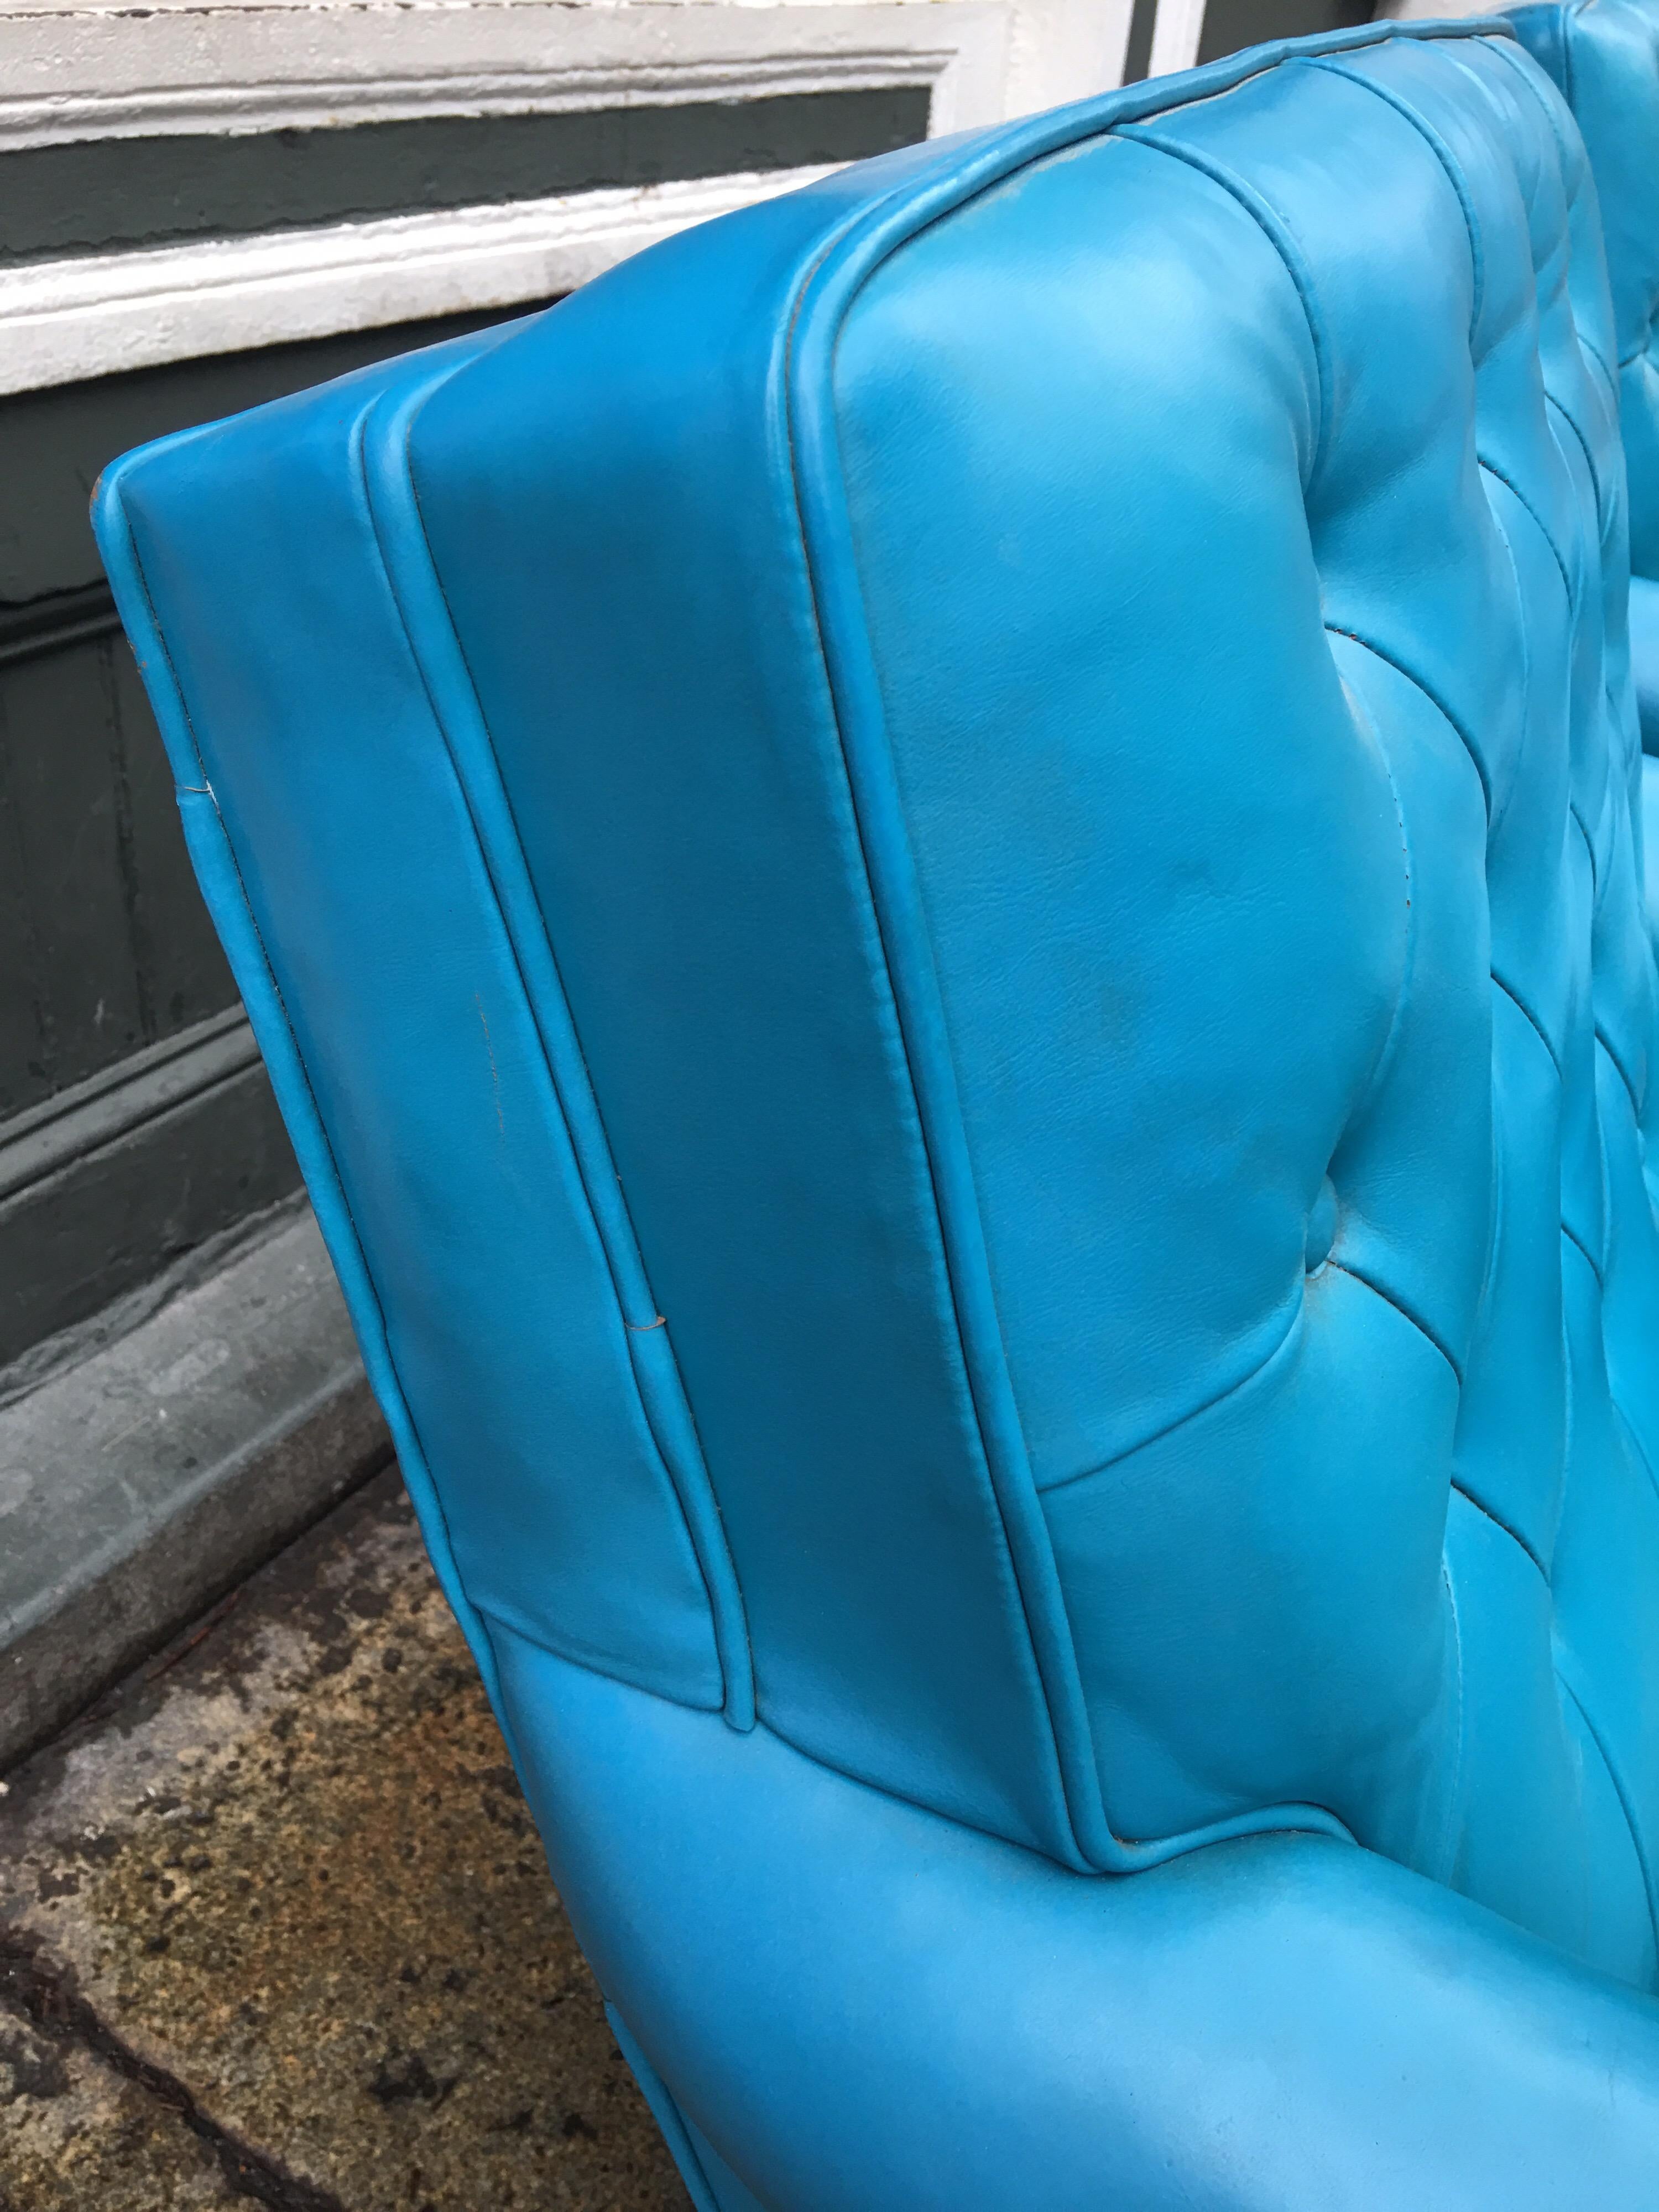 20th Century Pair of Aqua Blue Leather Chesterfield Club Chairs with Ottomans